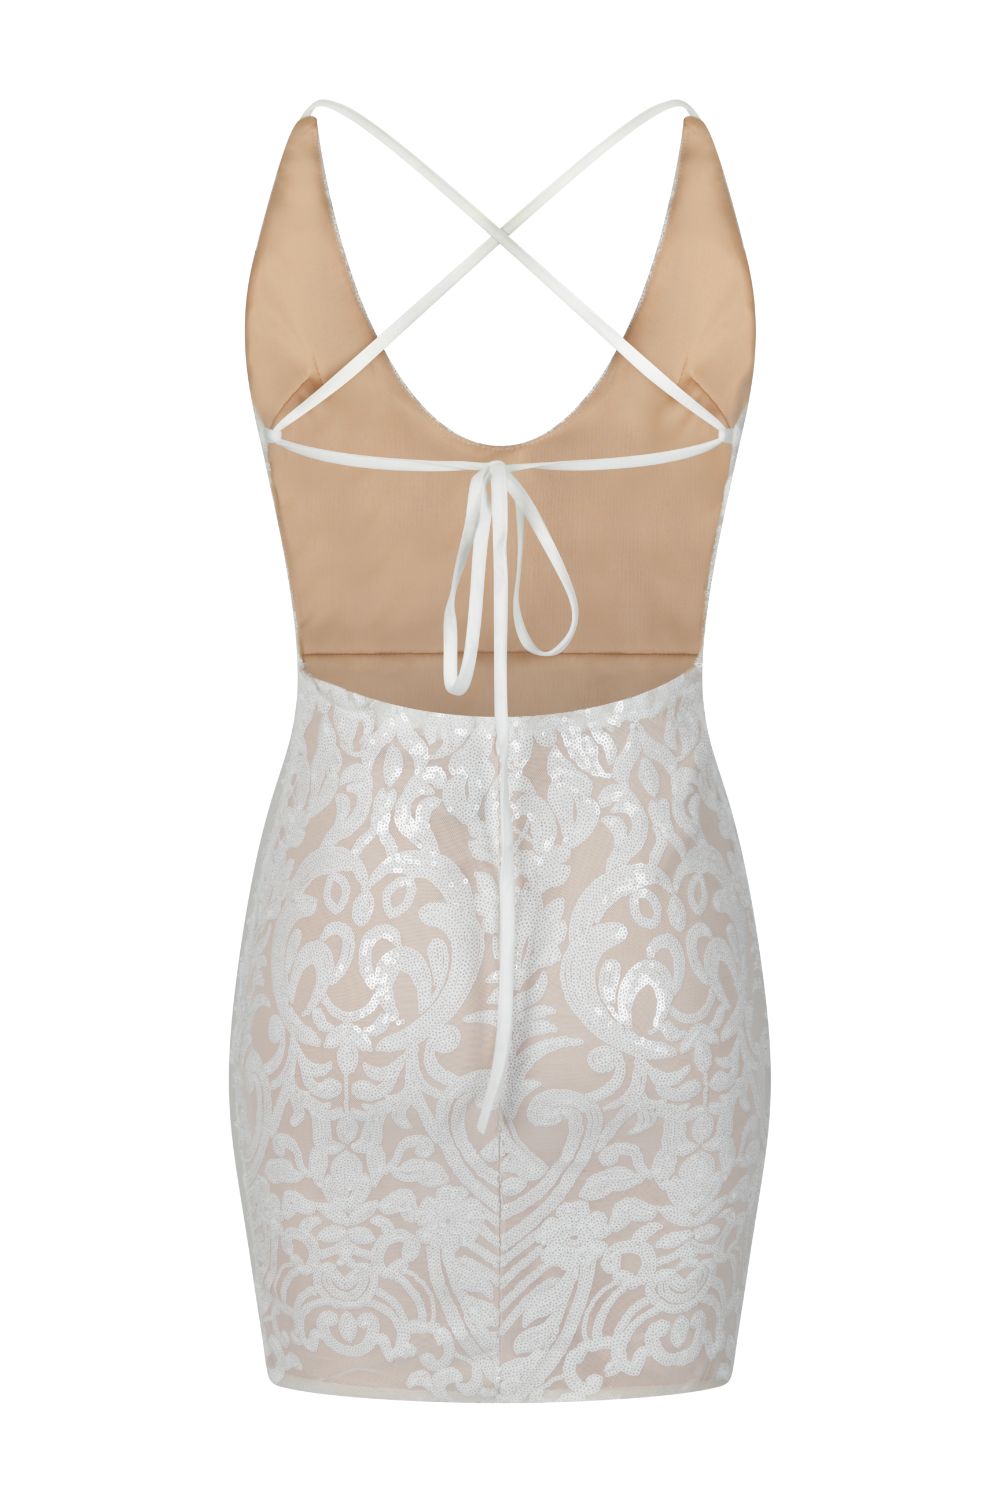 Icey Vip White Nude Plunge Floral Sequin Illusion Mini Dress